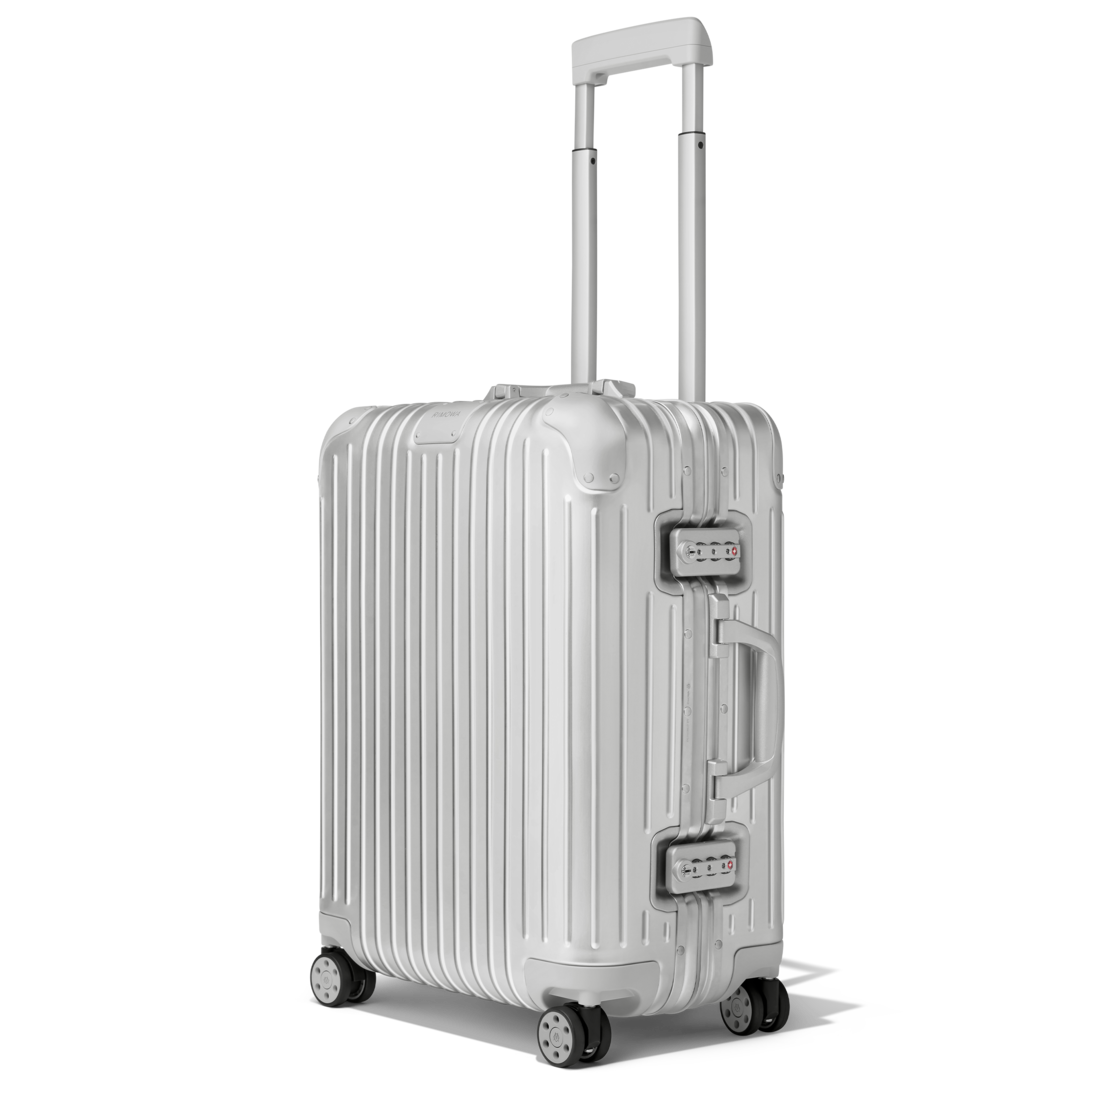 RIMOWA Designer Carry-On for Business Travel, silver